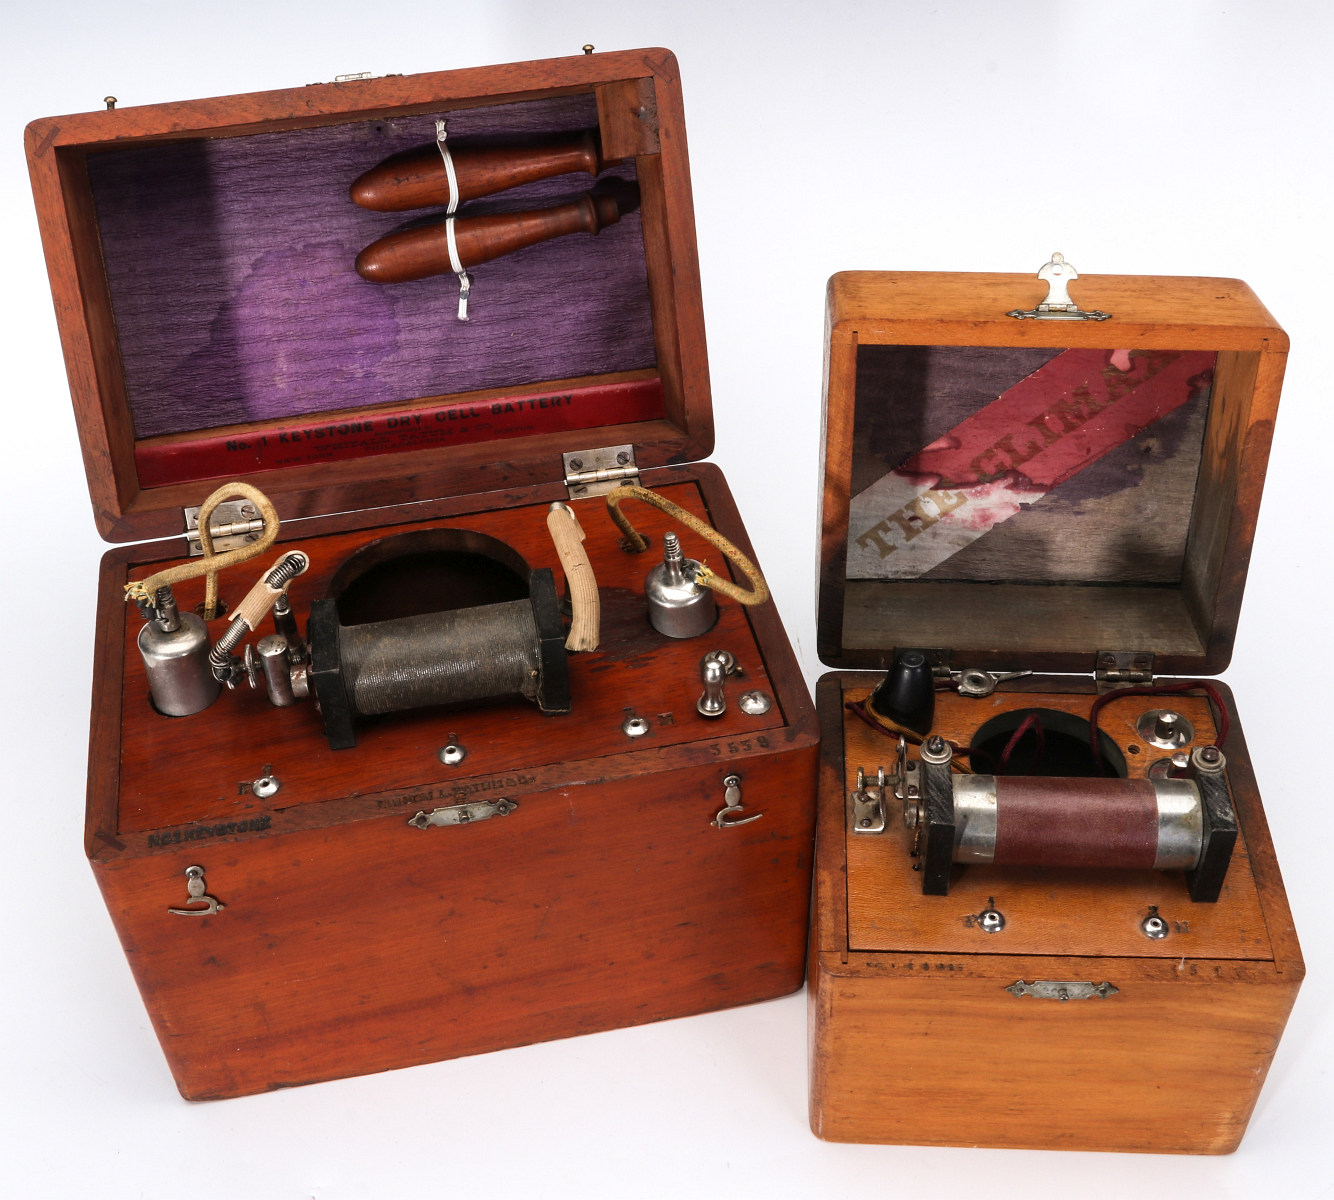 TWO LATE 19TH CENTURY QUACK MEDICAL DEVICES